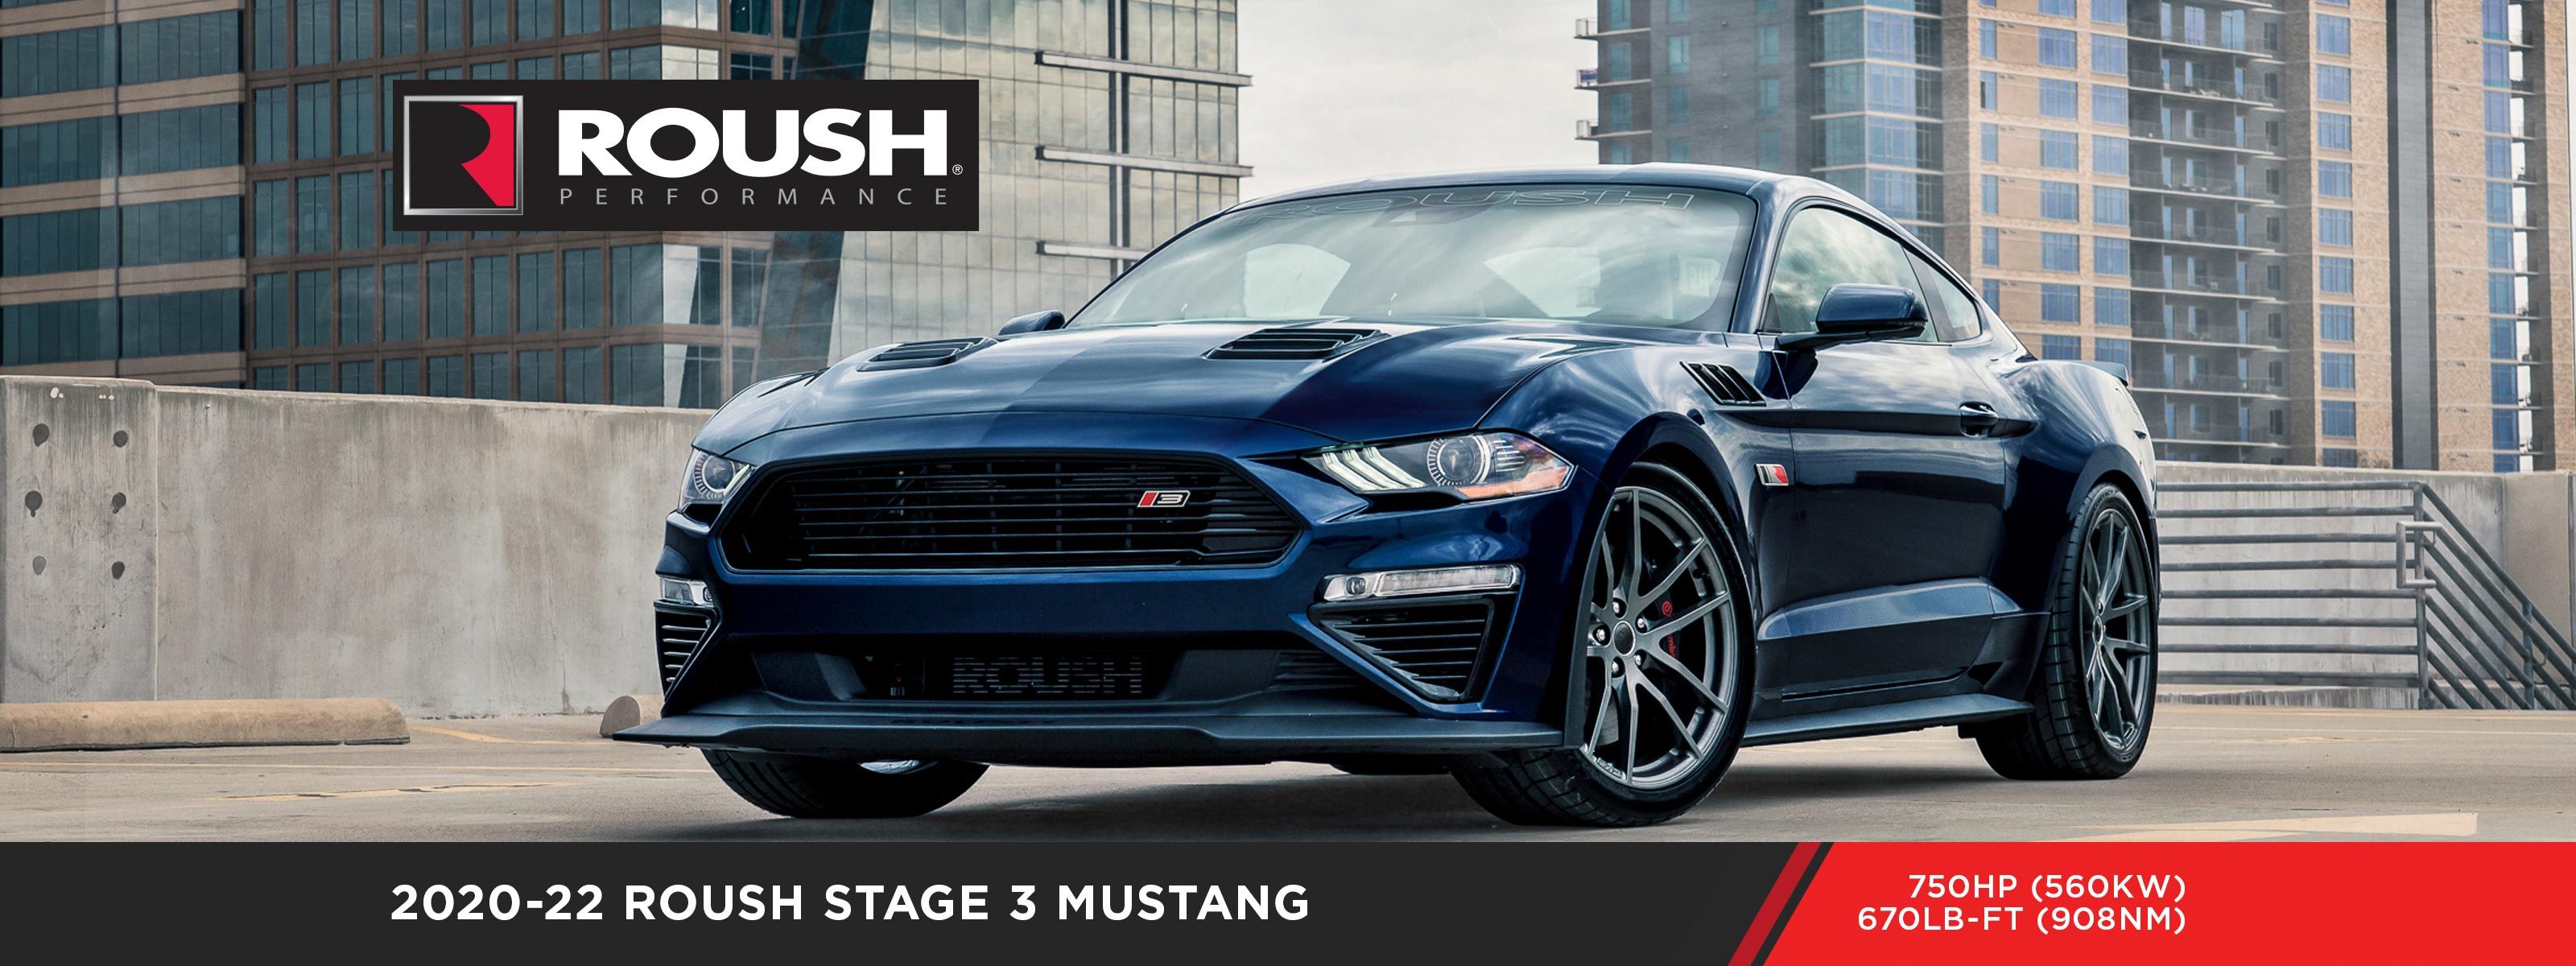 2021 ROUSH Stage 3 Supercharged Mustang